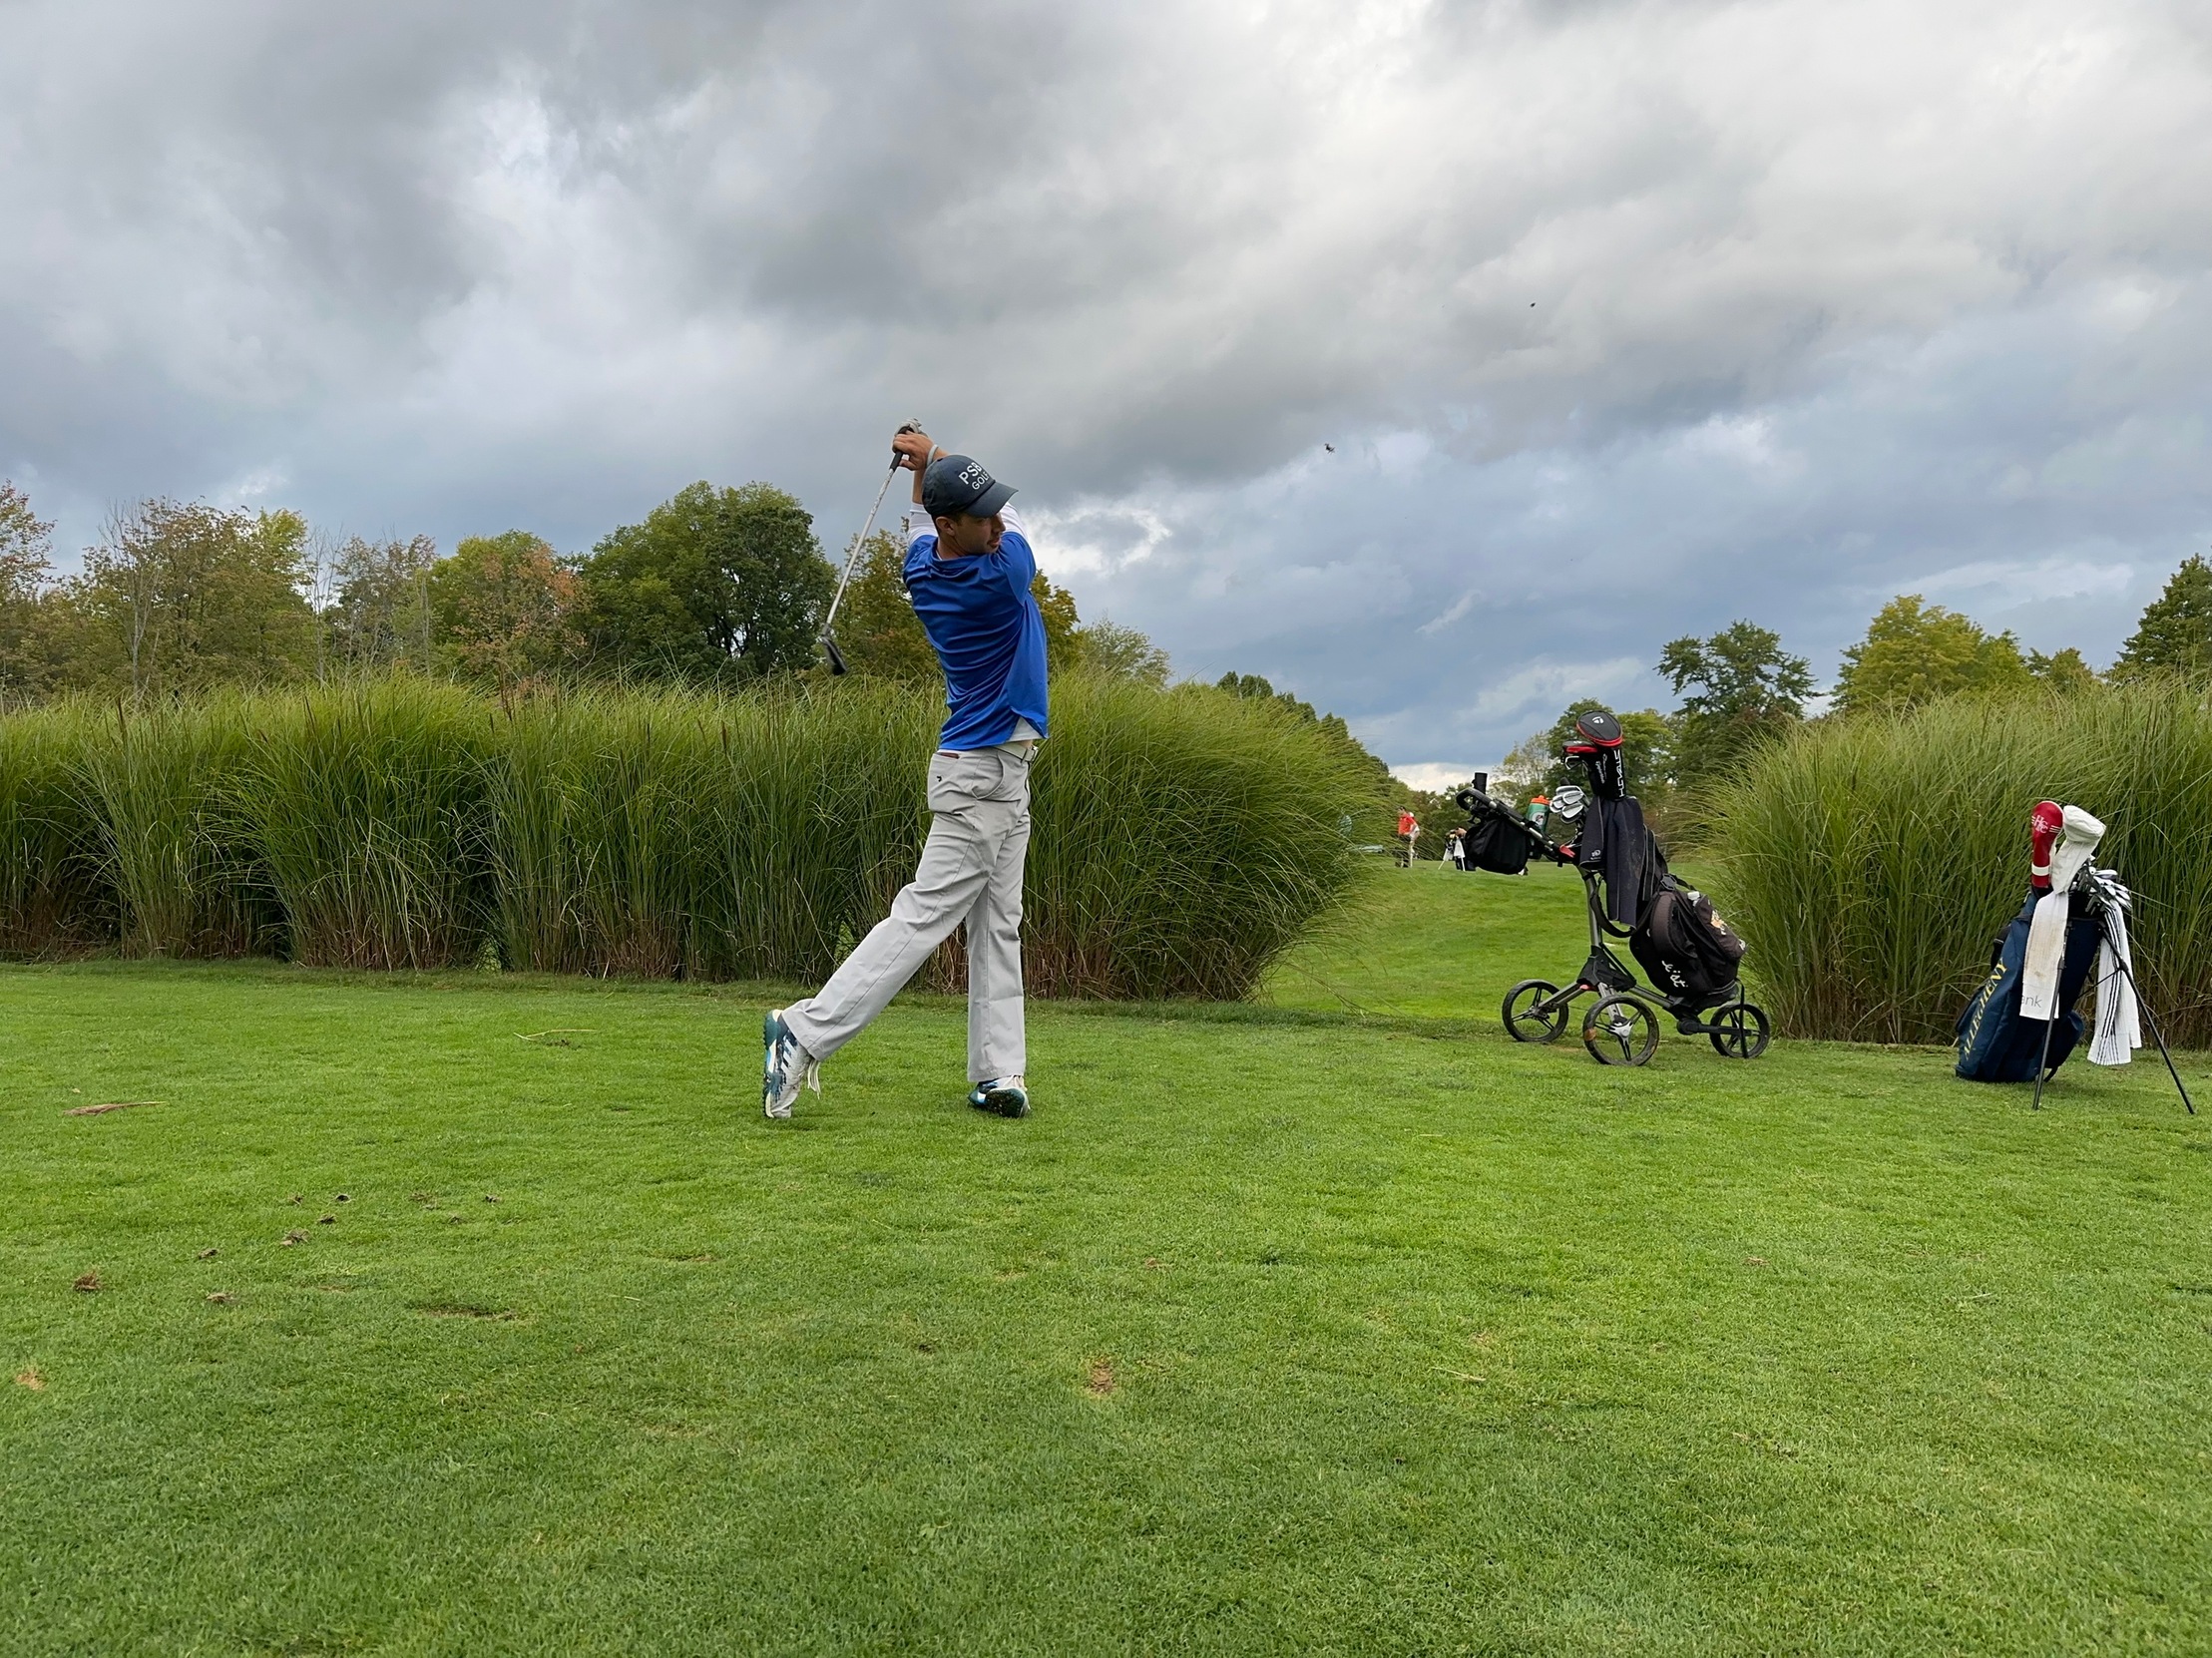 Men's Golfers Take On Day One of the Allegheny Invitational